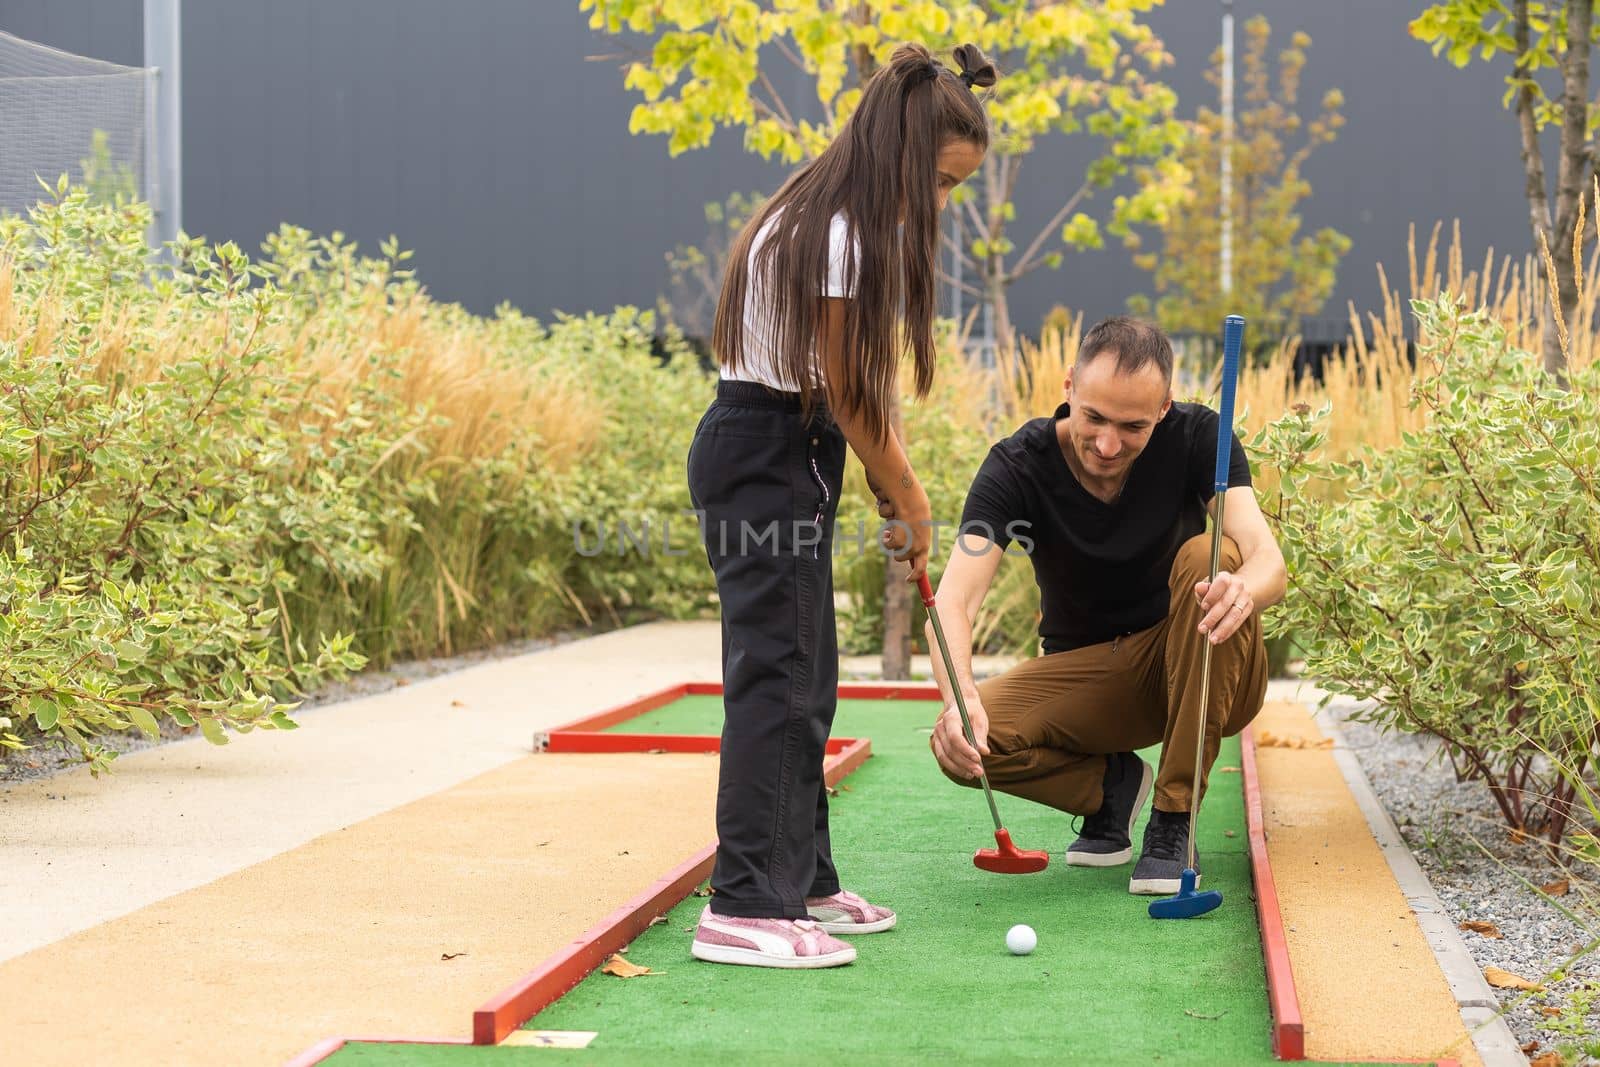 father and daughter playing mini golf together in the park by Andelov13